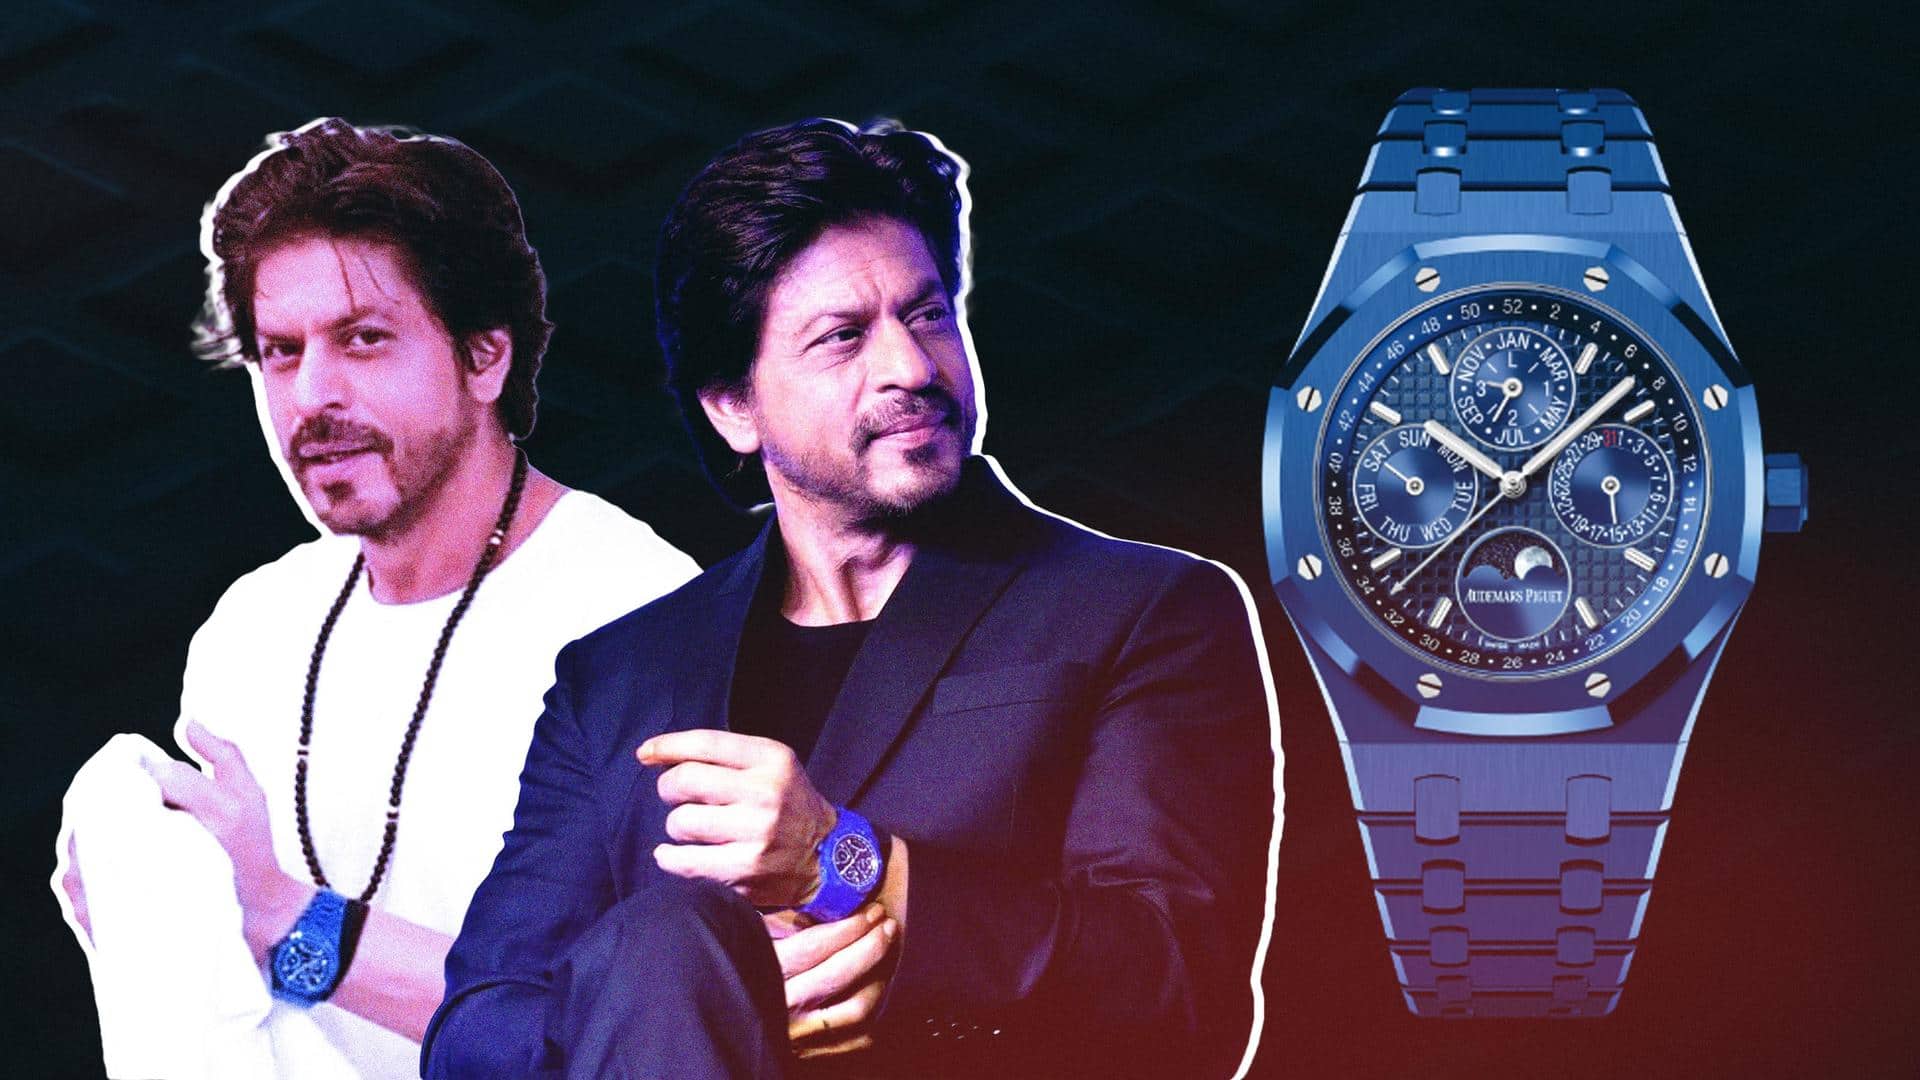 Shah Rukh Khan's glitzy blue watch costs whopping Rs. 4.98cr!